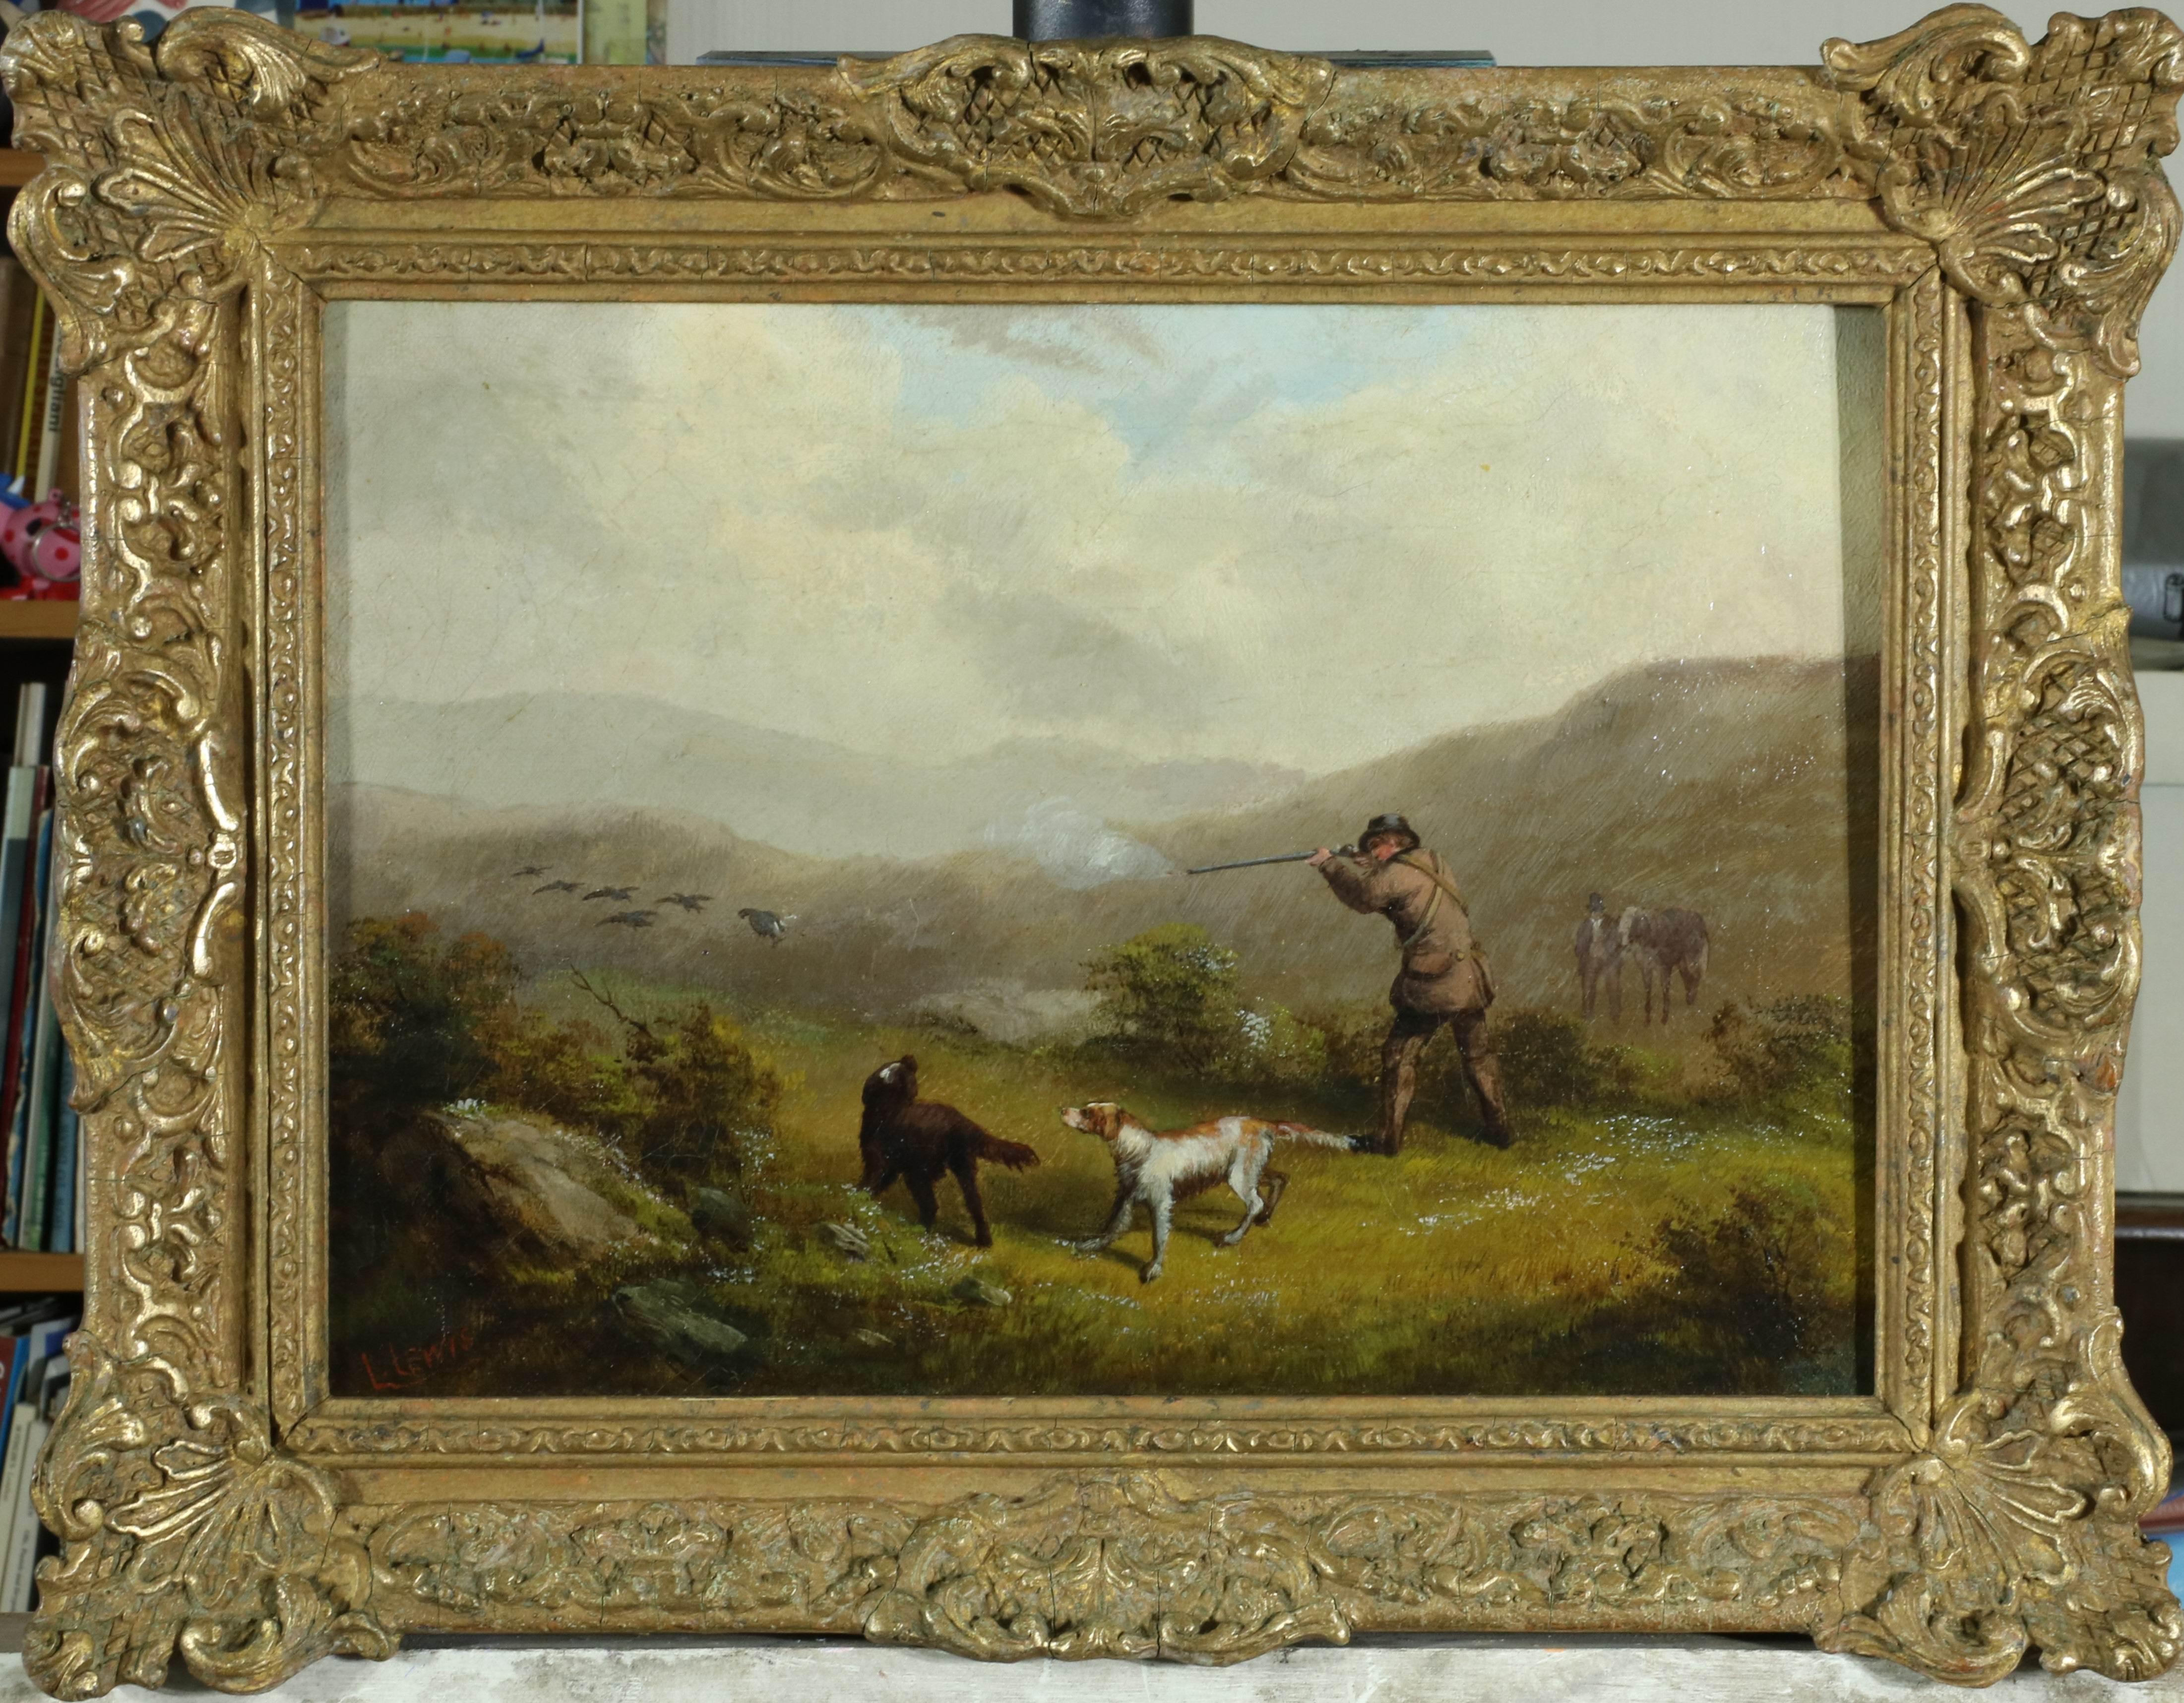 C19 Grouse Shoot Gun with Hunting Dogs and grouse in hilly landscape, Oil  - Realist Painting by Lennard Lewis